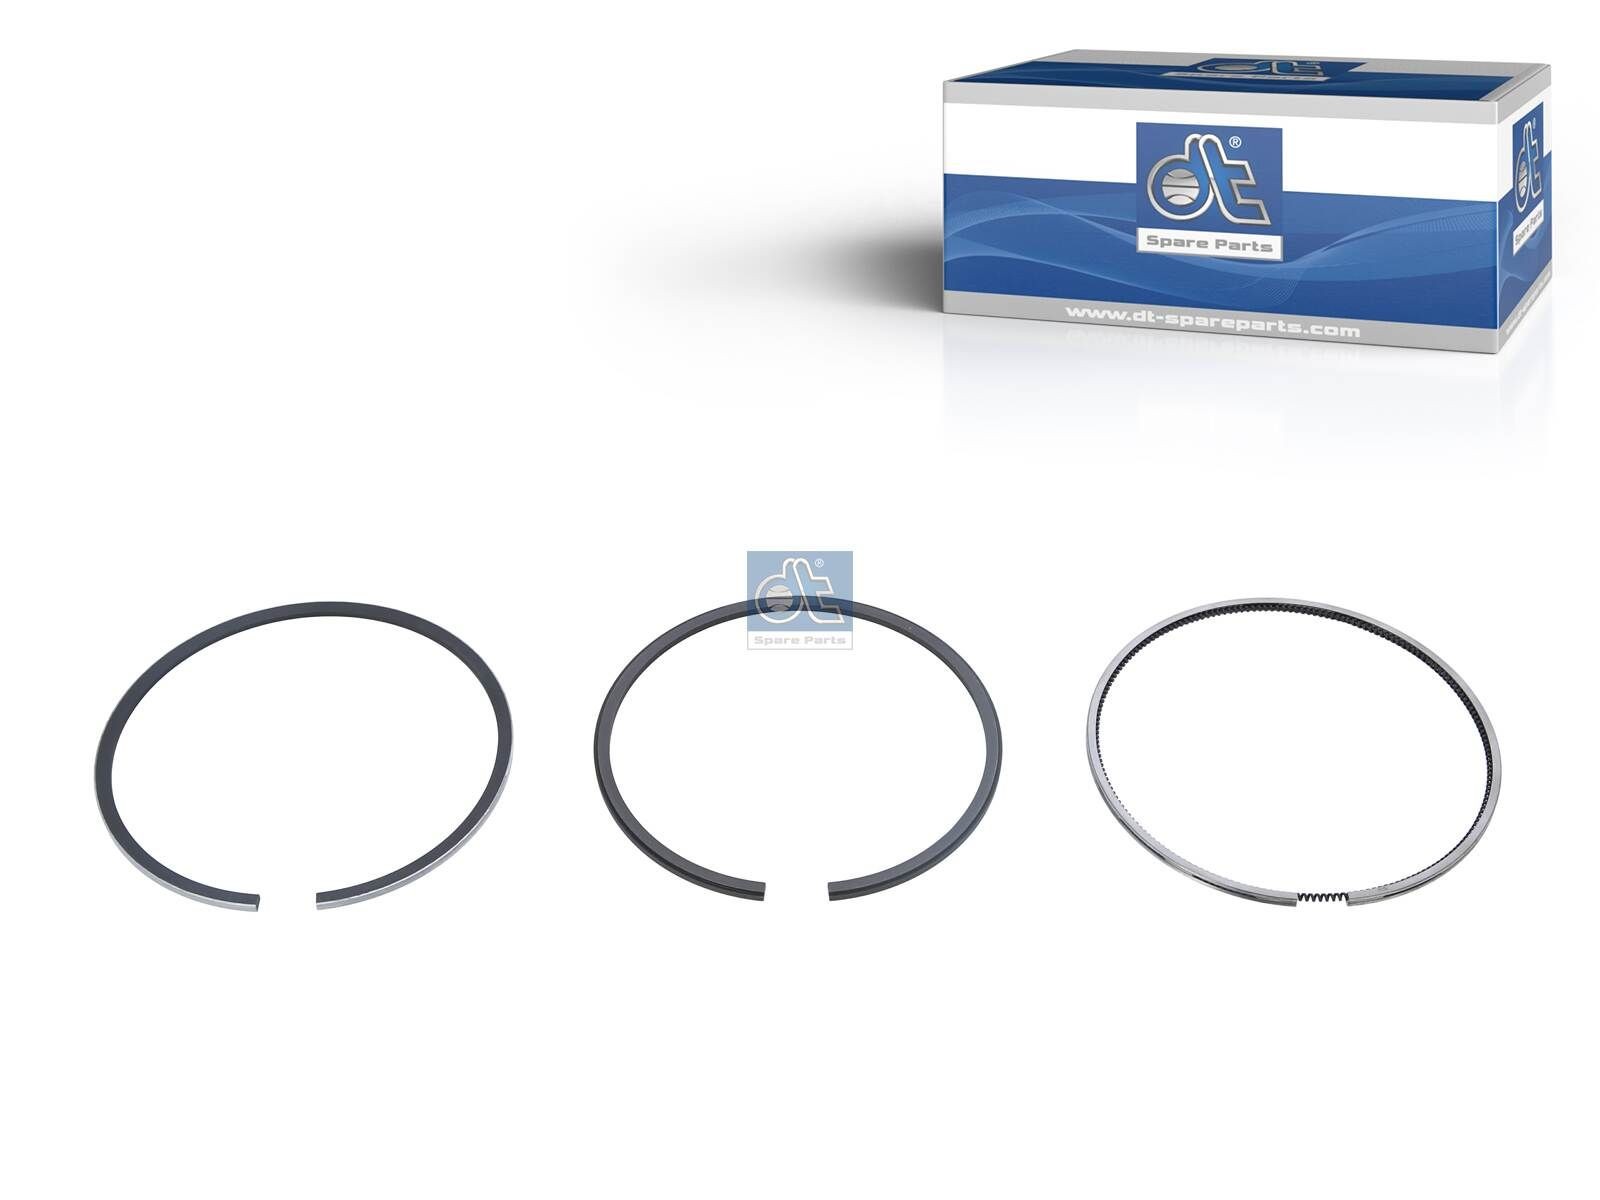 800070310000 DT Spare Parts Piston Ring Set 7.94503 buy